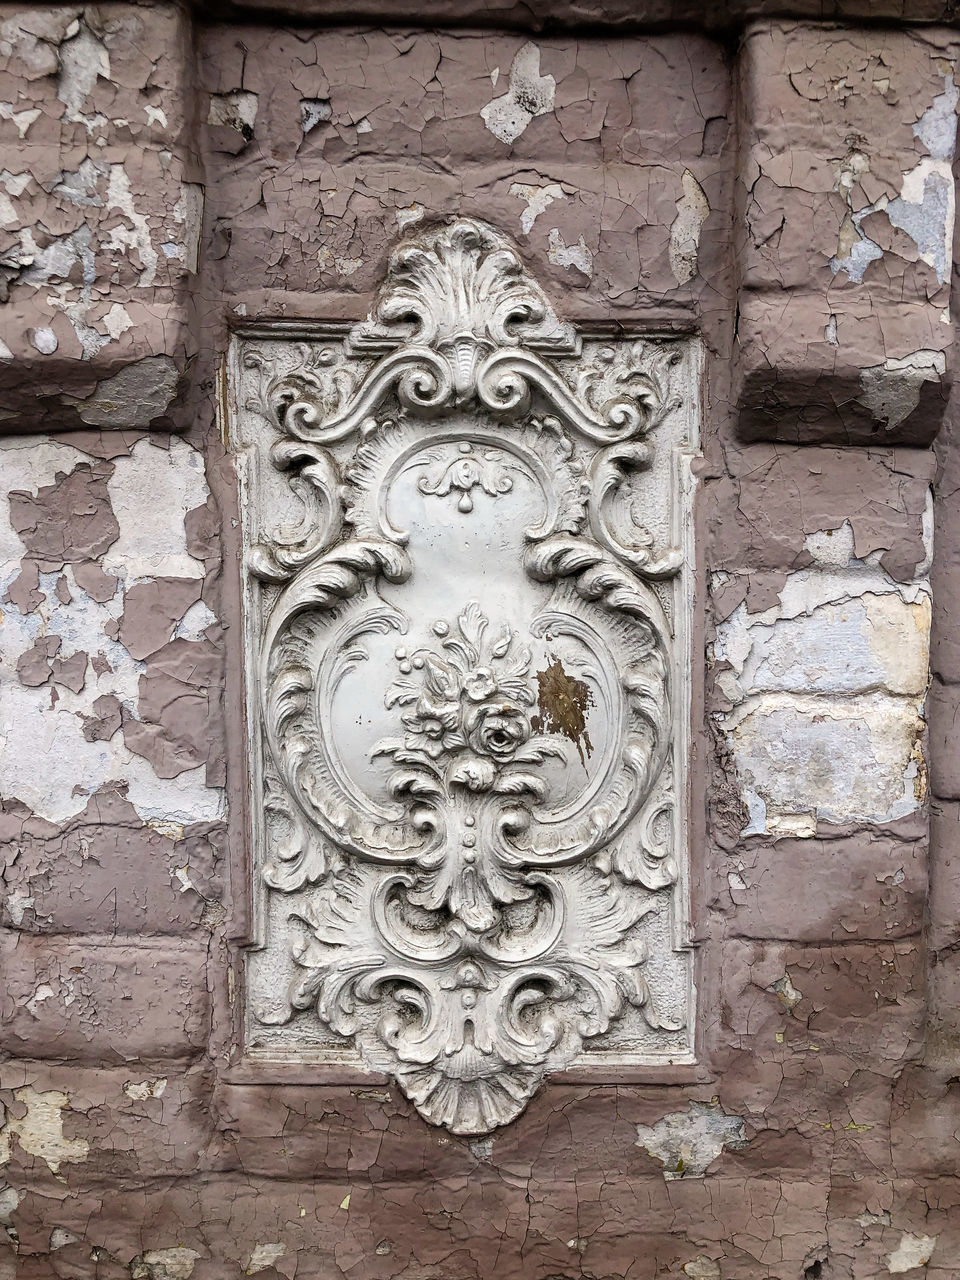 CLOSE-UP OF ORNATE DOOR ON WALL